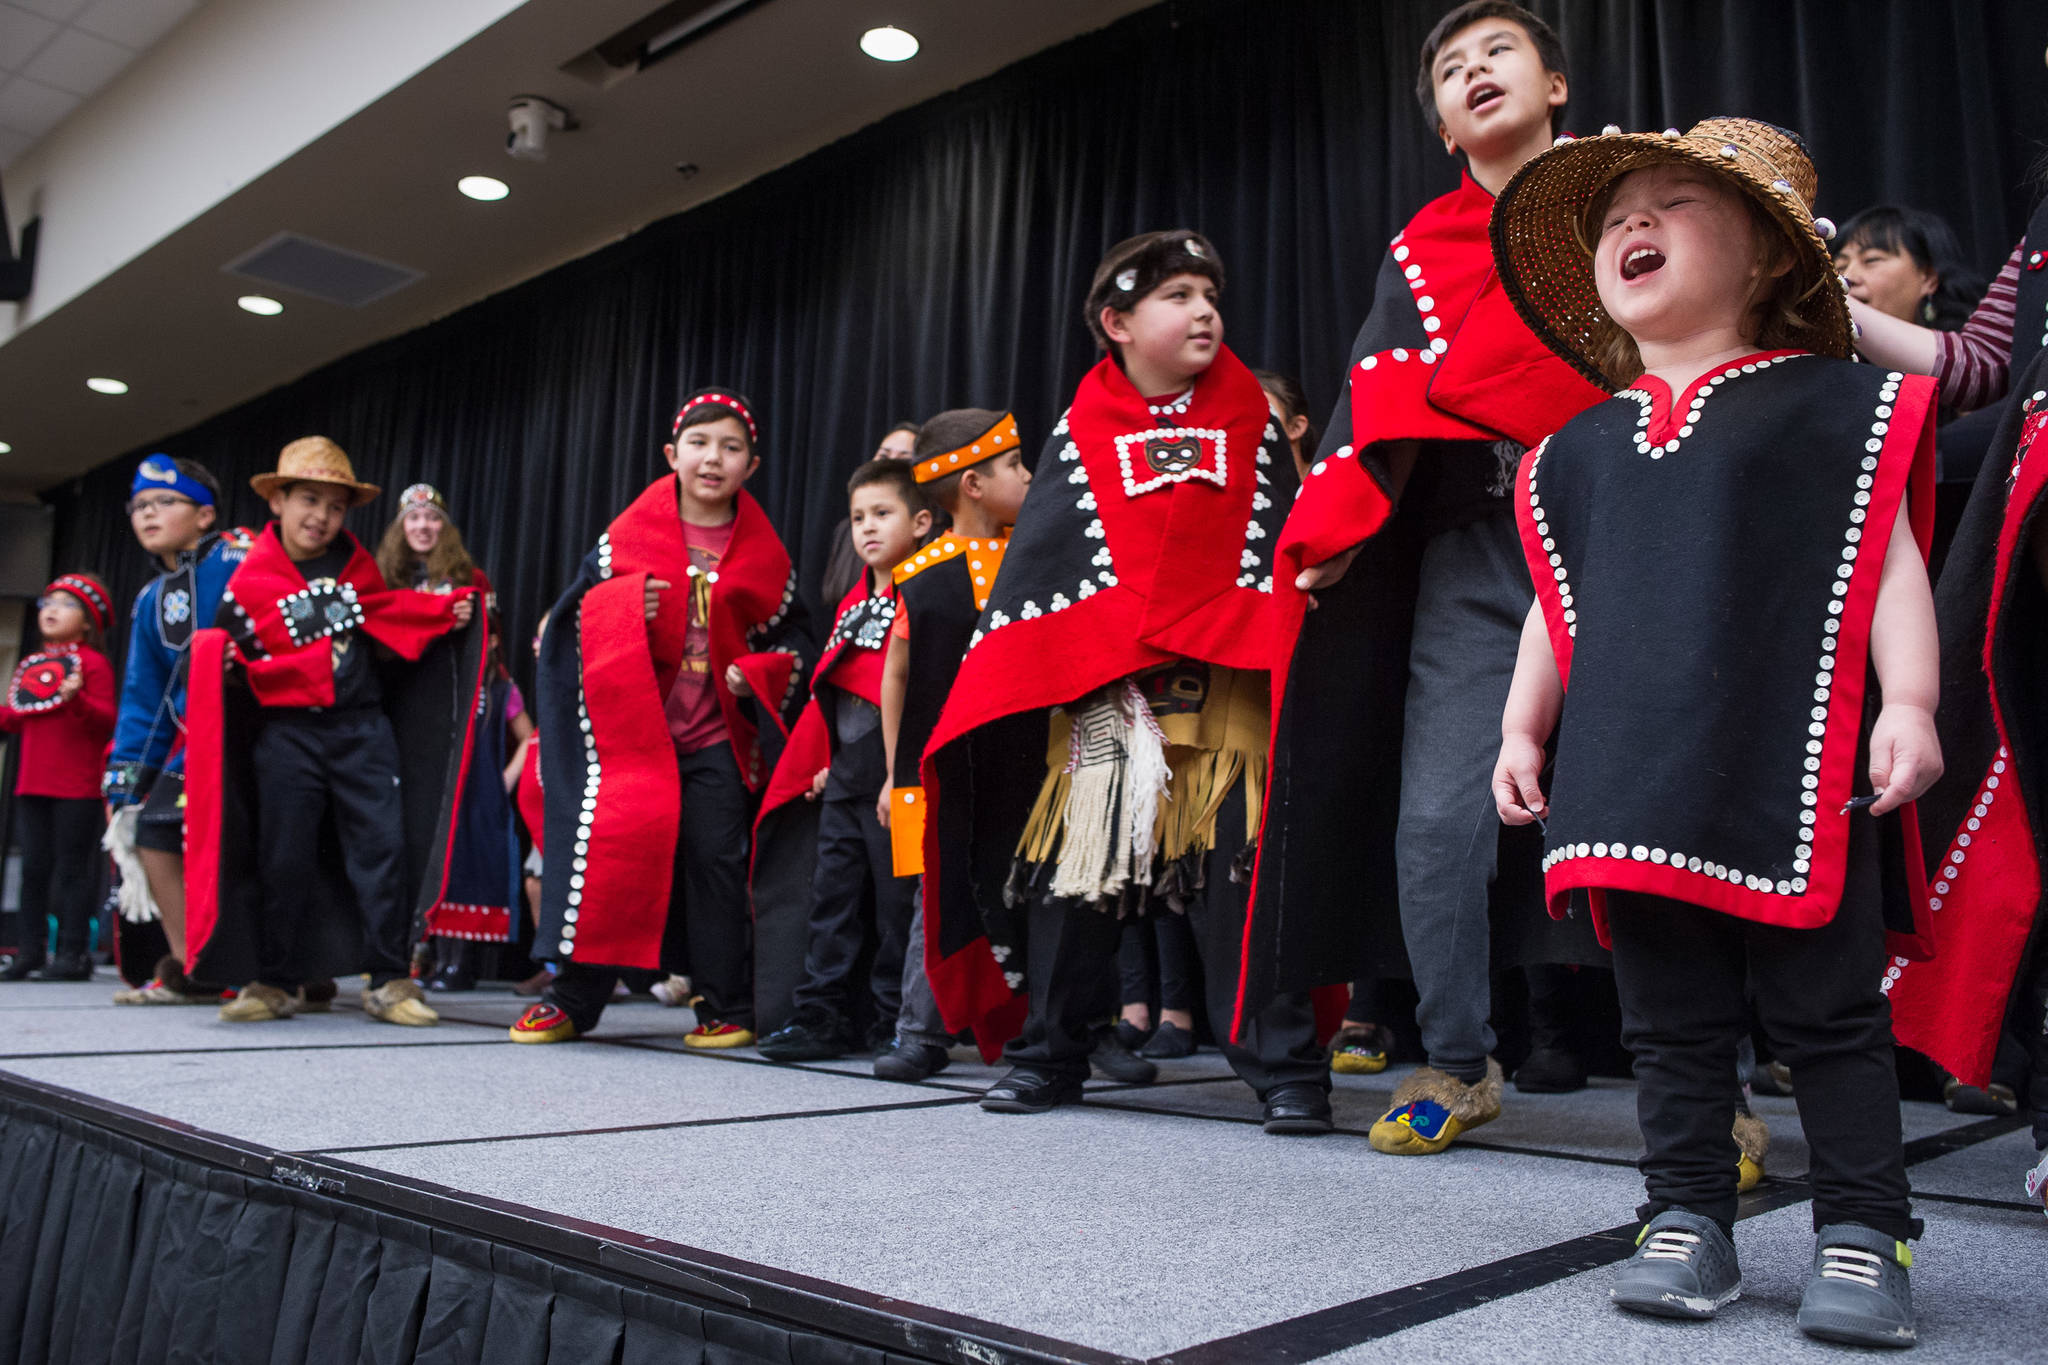 Natalie Soto, 2, helps sing with the All Nations Children Dancers as Juneau residents celebrate Indigenous Peoples Day at Elizabeth Peratrovich Hall on Monday, Oct. 9, 2017. (Michael Penn